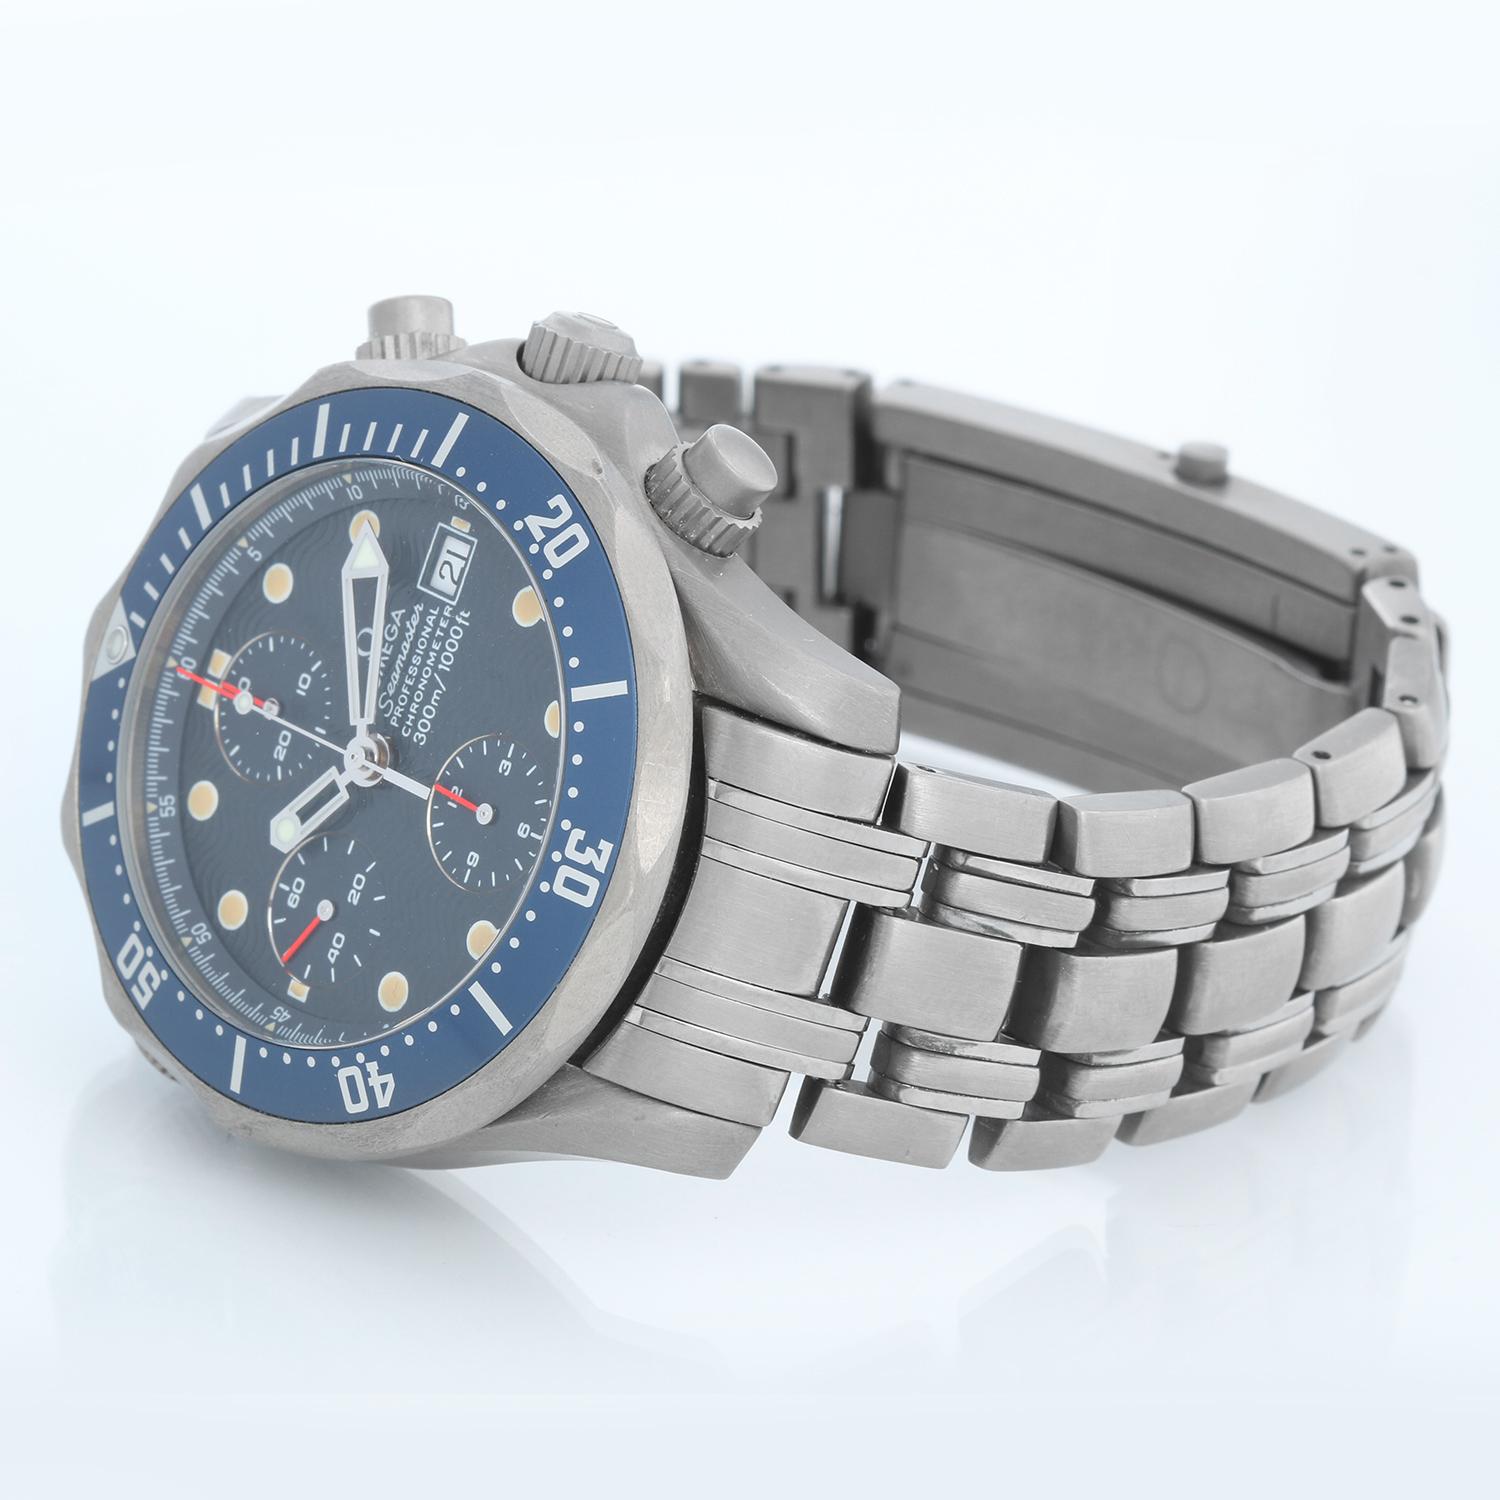 Omega Seamaster Chronograph Blue Dial Titanium Watch 2298.80.00 - Automatic winding. Titanium case (42 mm ) . Blue wave dial with luminous skeleton hands and hour markers. Date window at 3 o'clock. Titanium bracelet with double folding clasp; will